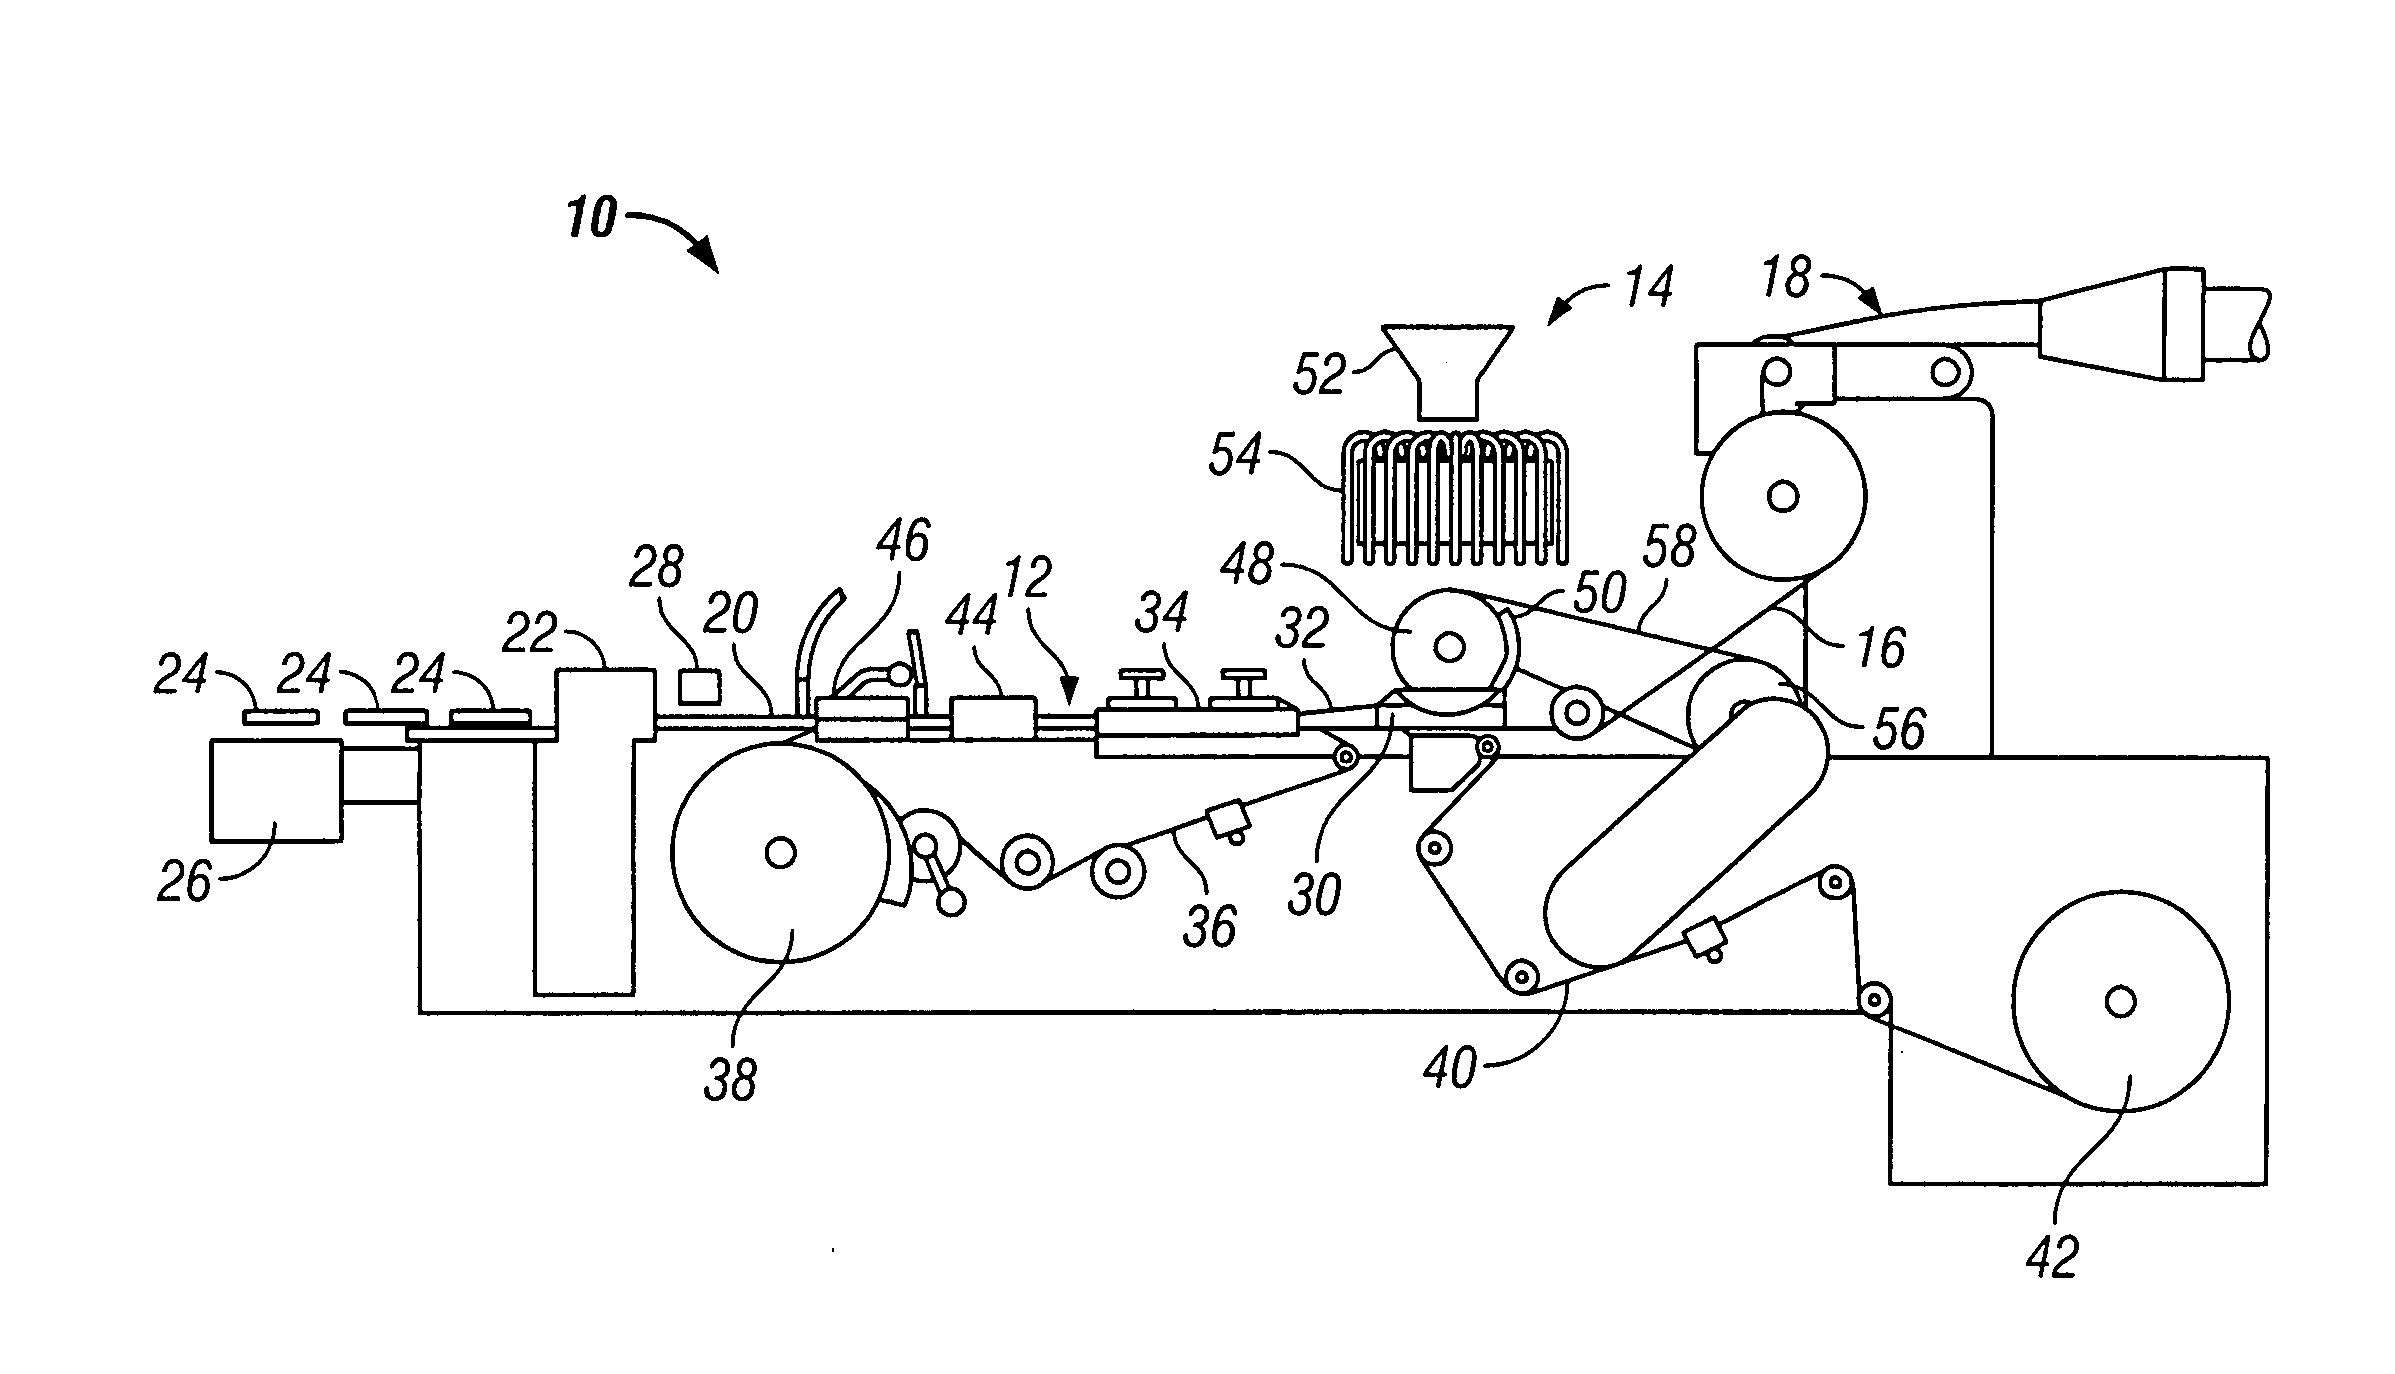 Method and apparatus for incorporating objects into cigarette filters